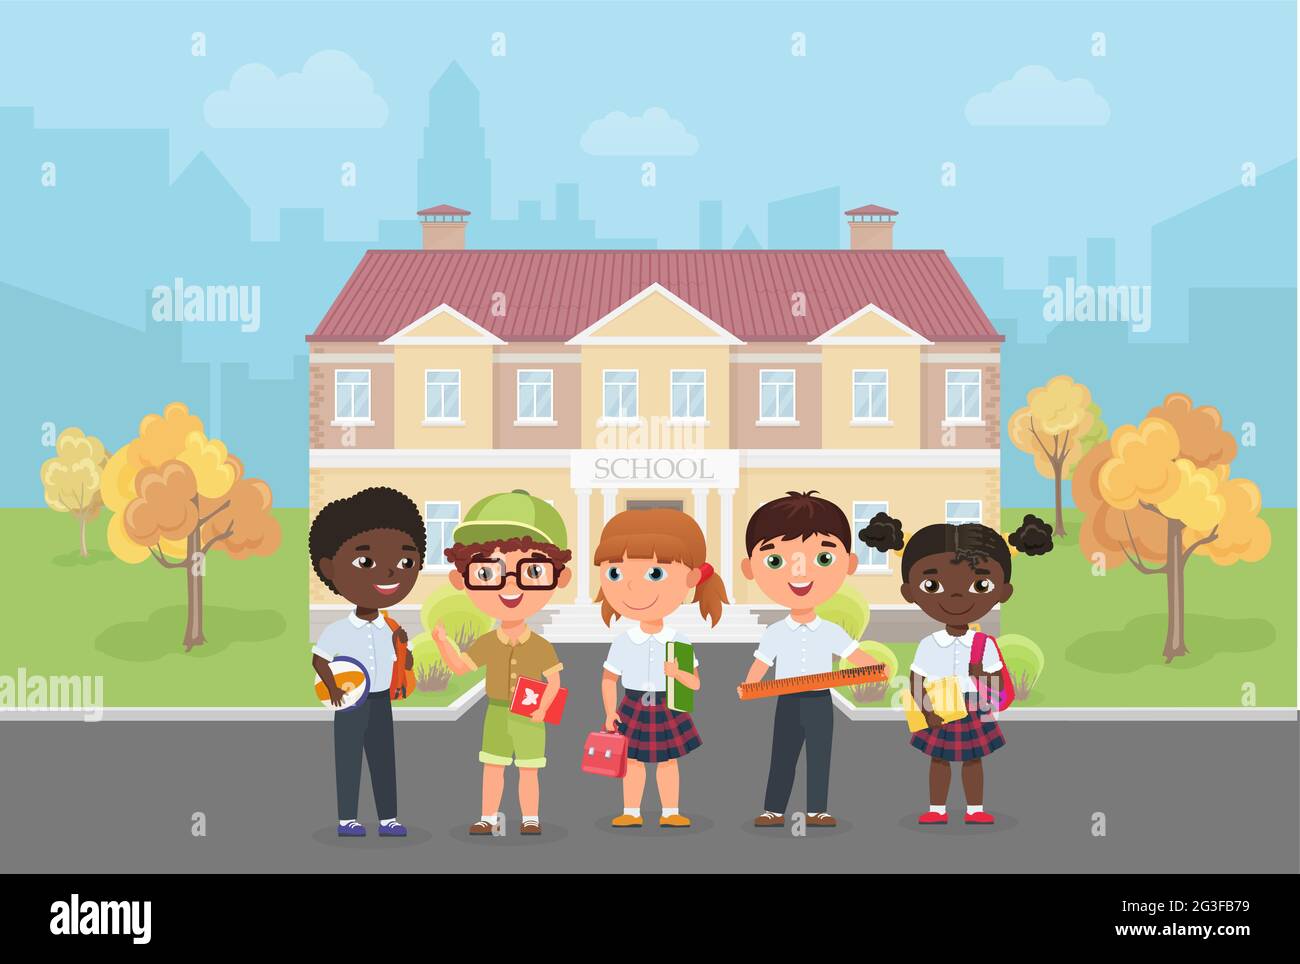 Children students stand in front of school building vector illustration.  Cartoon diverse group of kids ready to learn and study, funny little girl  boy child characters standing together background Stock Vector Image